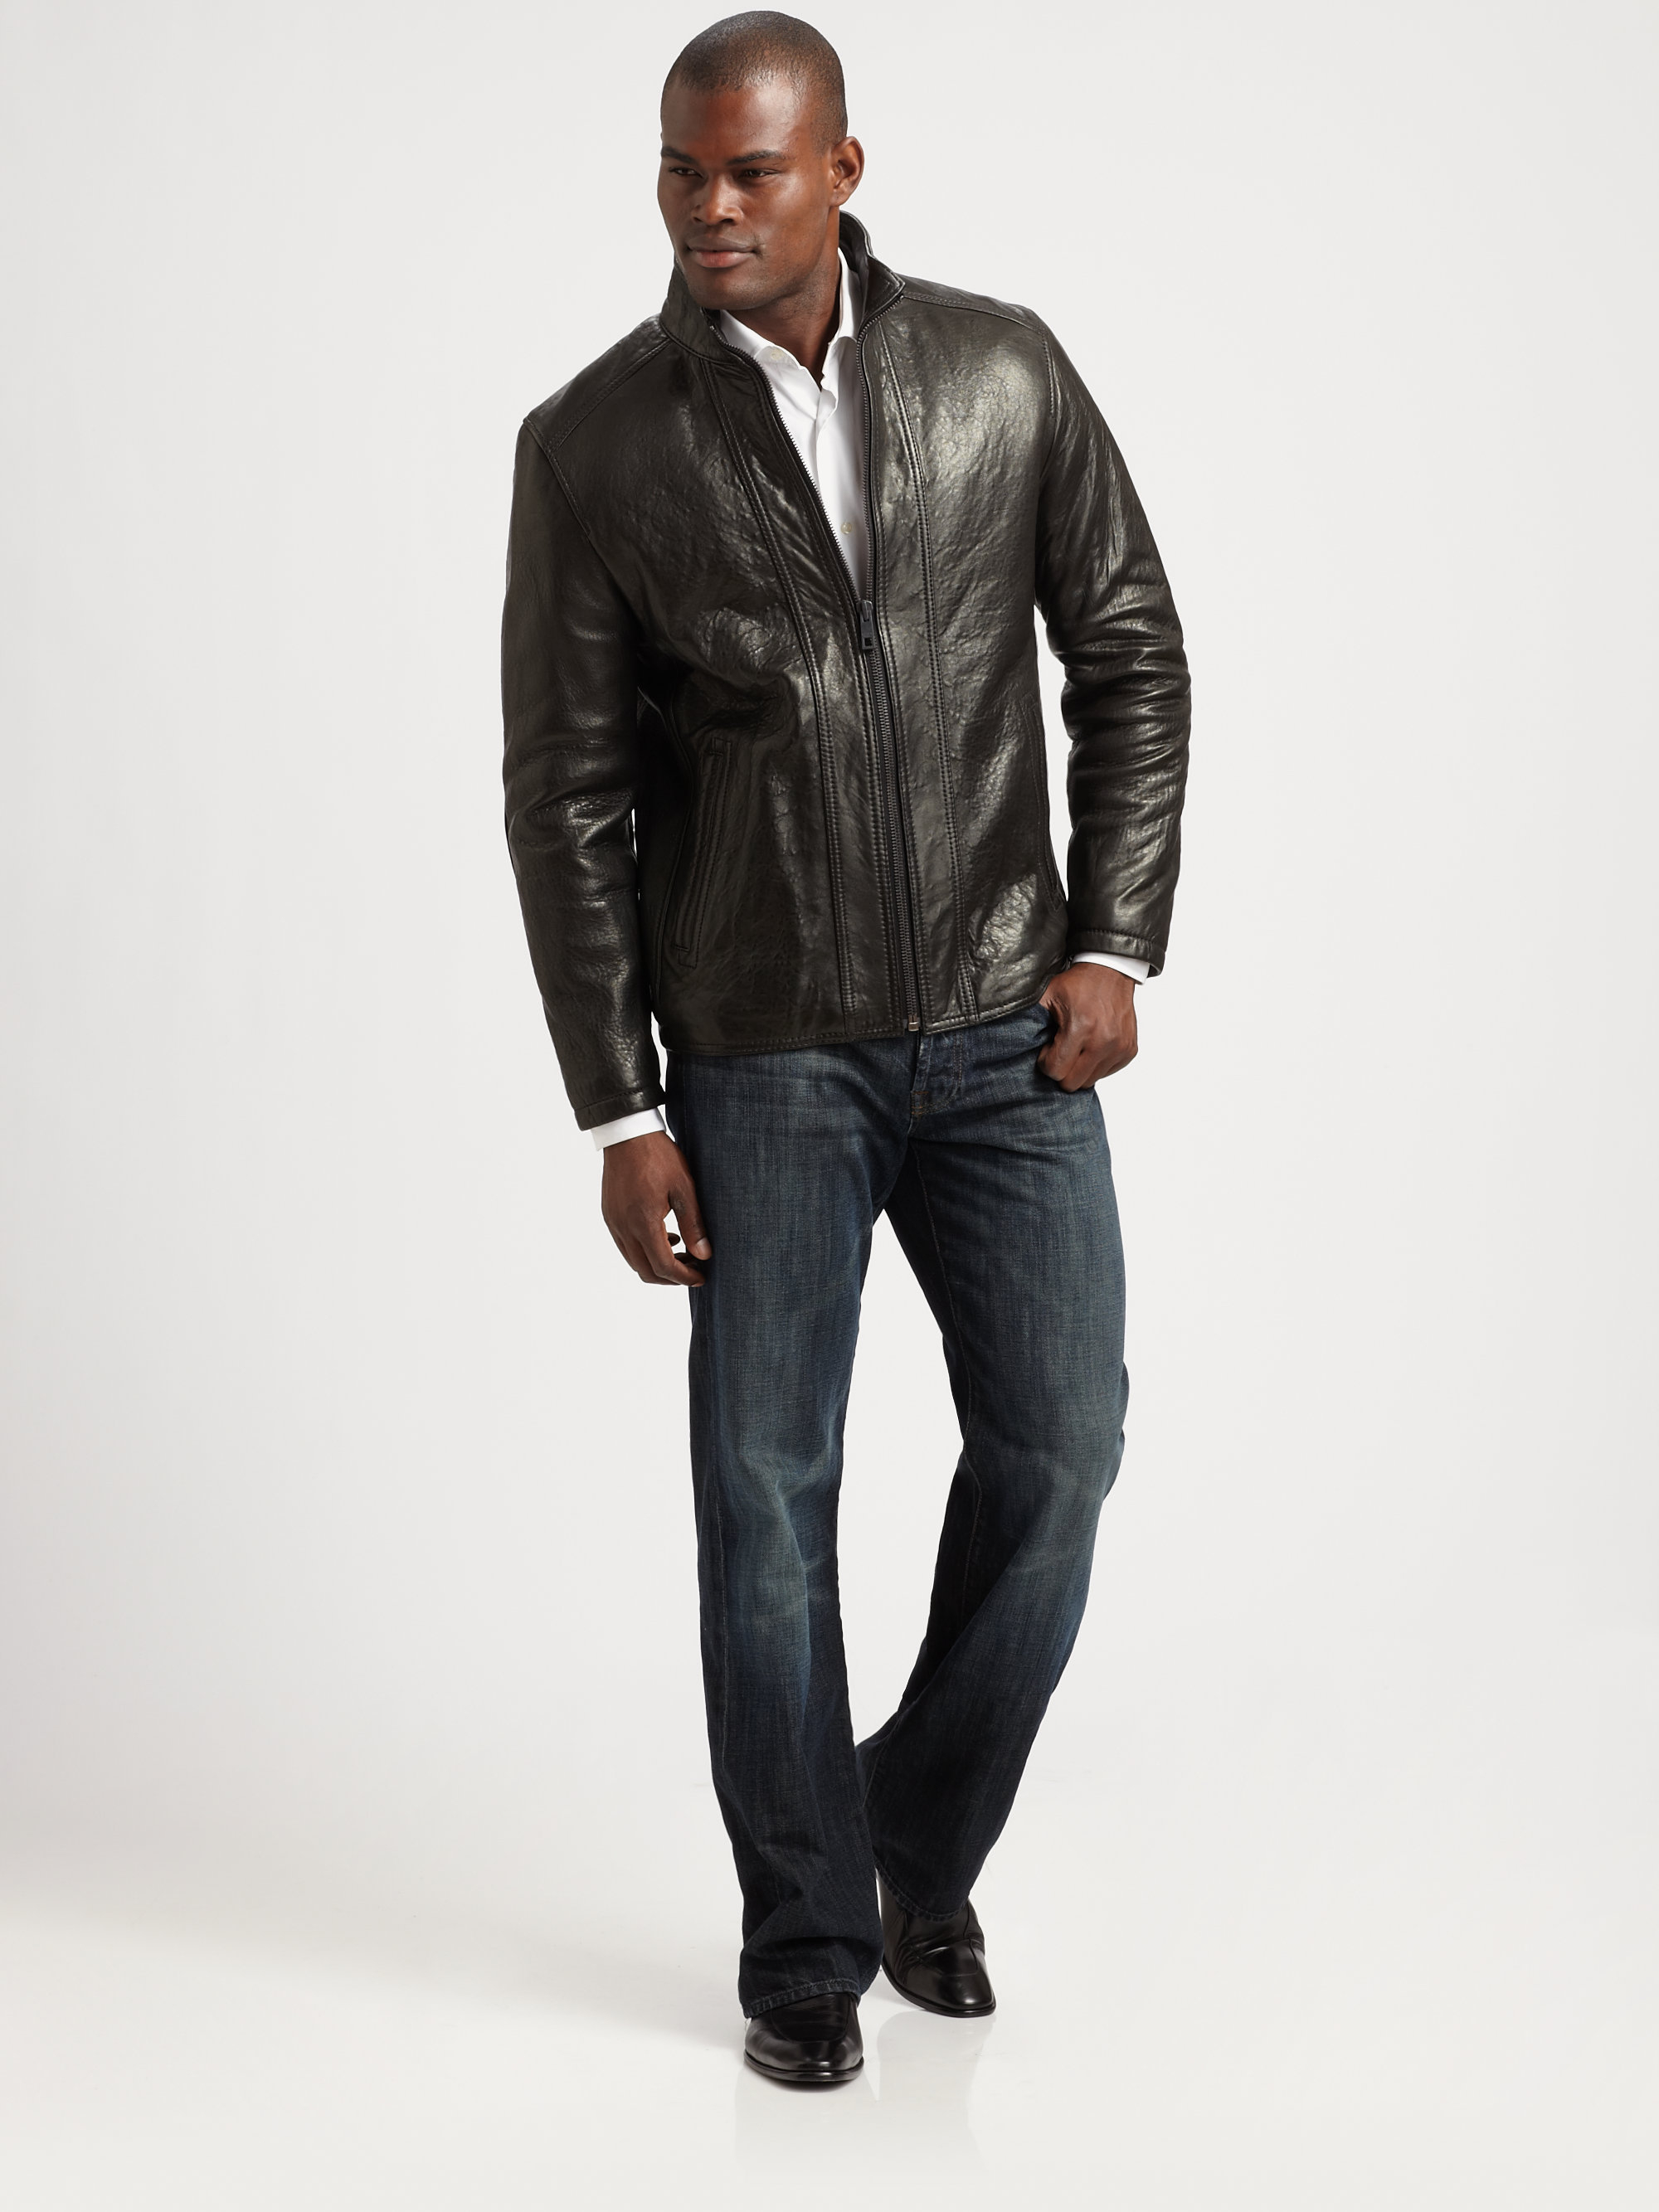 Lyst - Andrew Marc French Rugged Leather Jacket in Black for Men